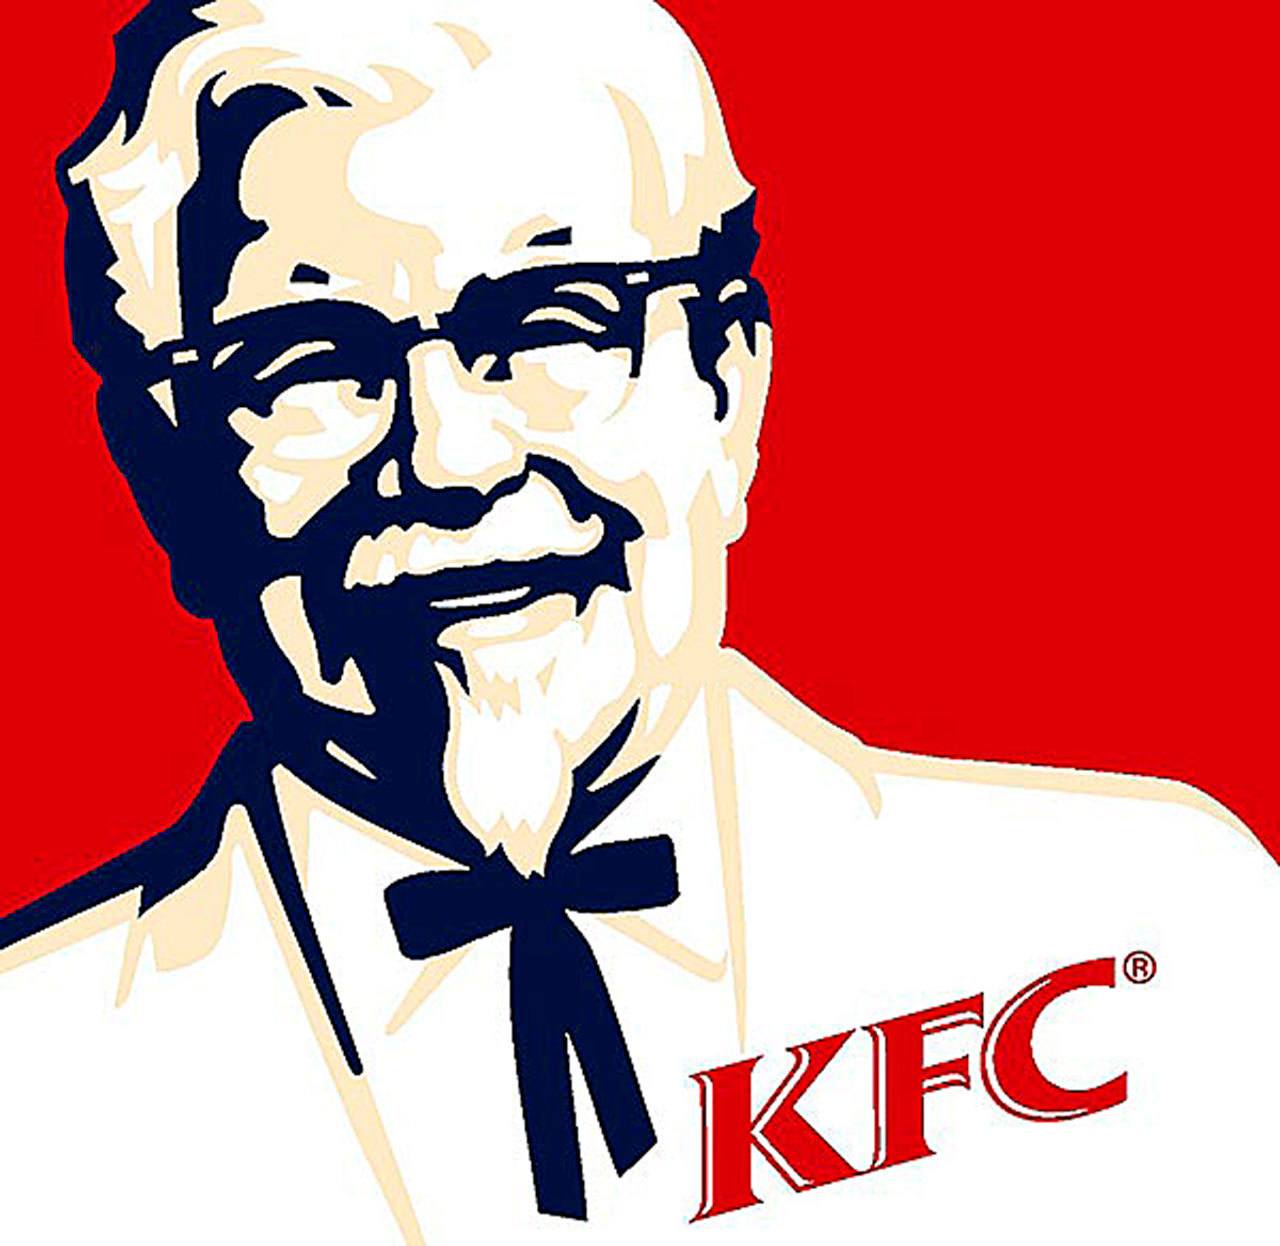 Colonel Sanders’ nephew may have inadvertently revealed the secret blend.